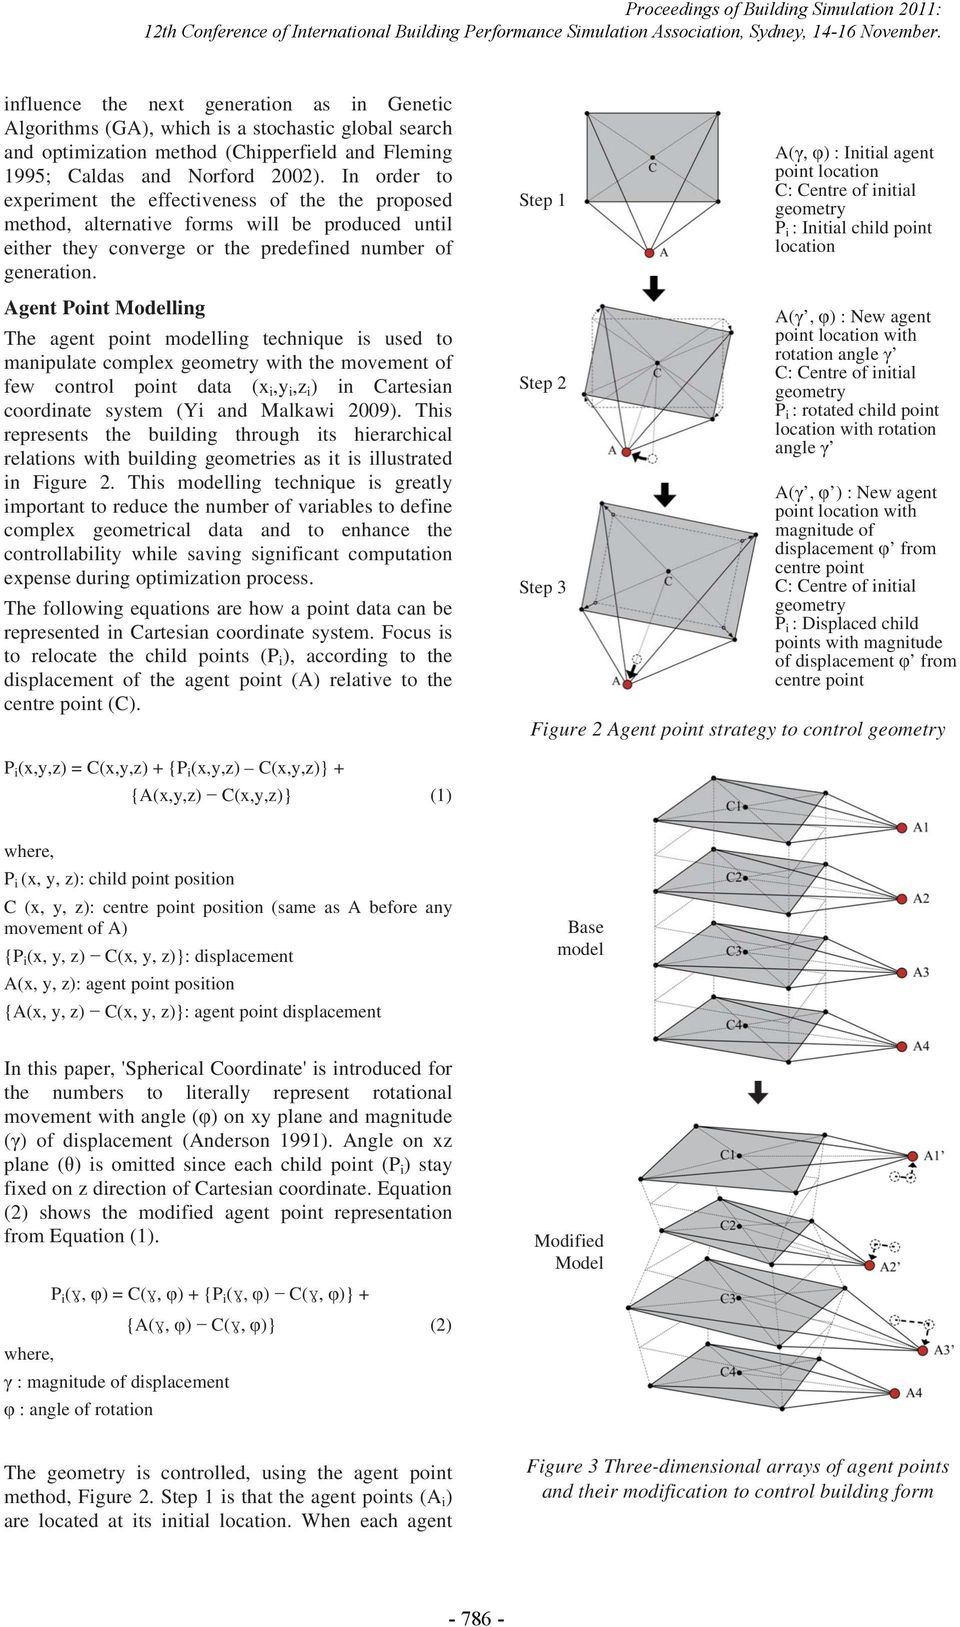 Agent Point Modelling The agent point modelling technique is used to manipulate complex geometry with the movement of few control point data (xi,yi,zi) in Cartesian coordinate system (Yi and Malkawi